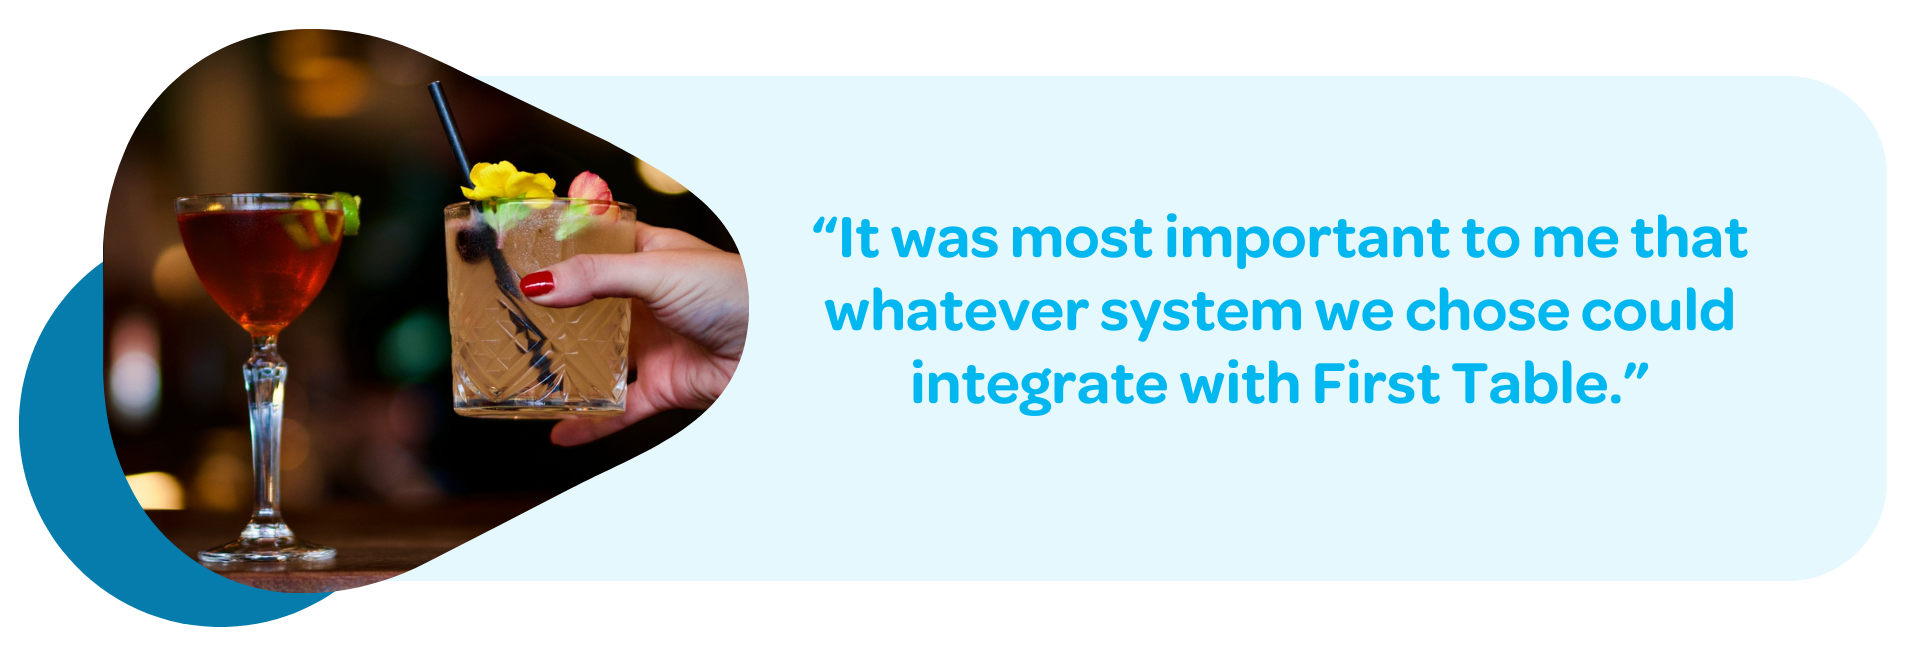 “It was most important to me that whatever system we chose could integrate with First Table.”